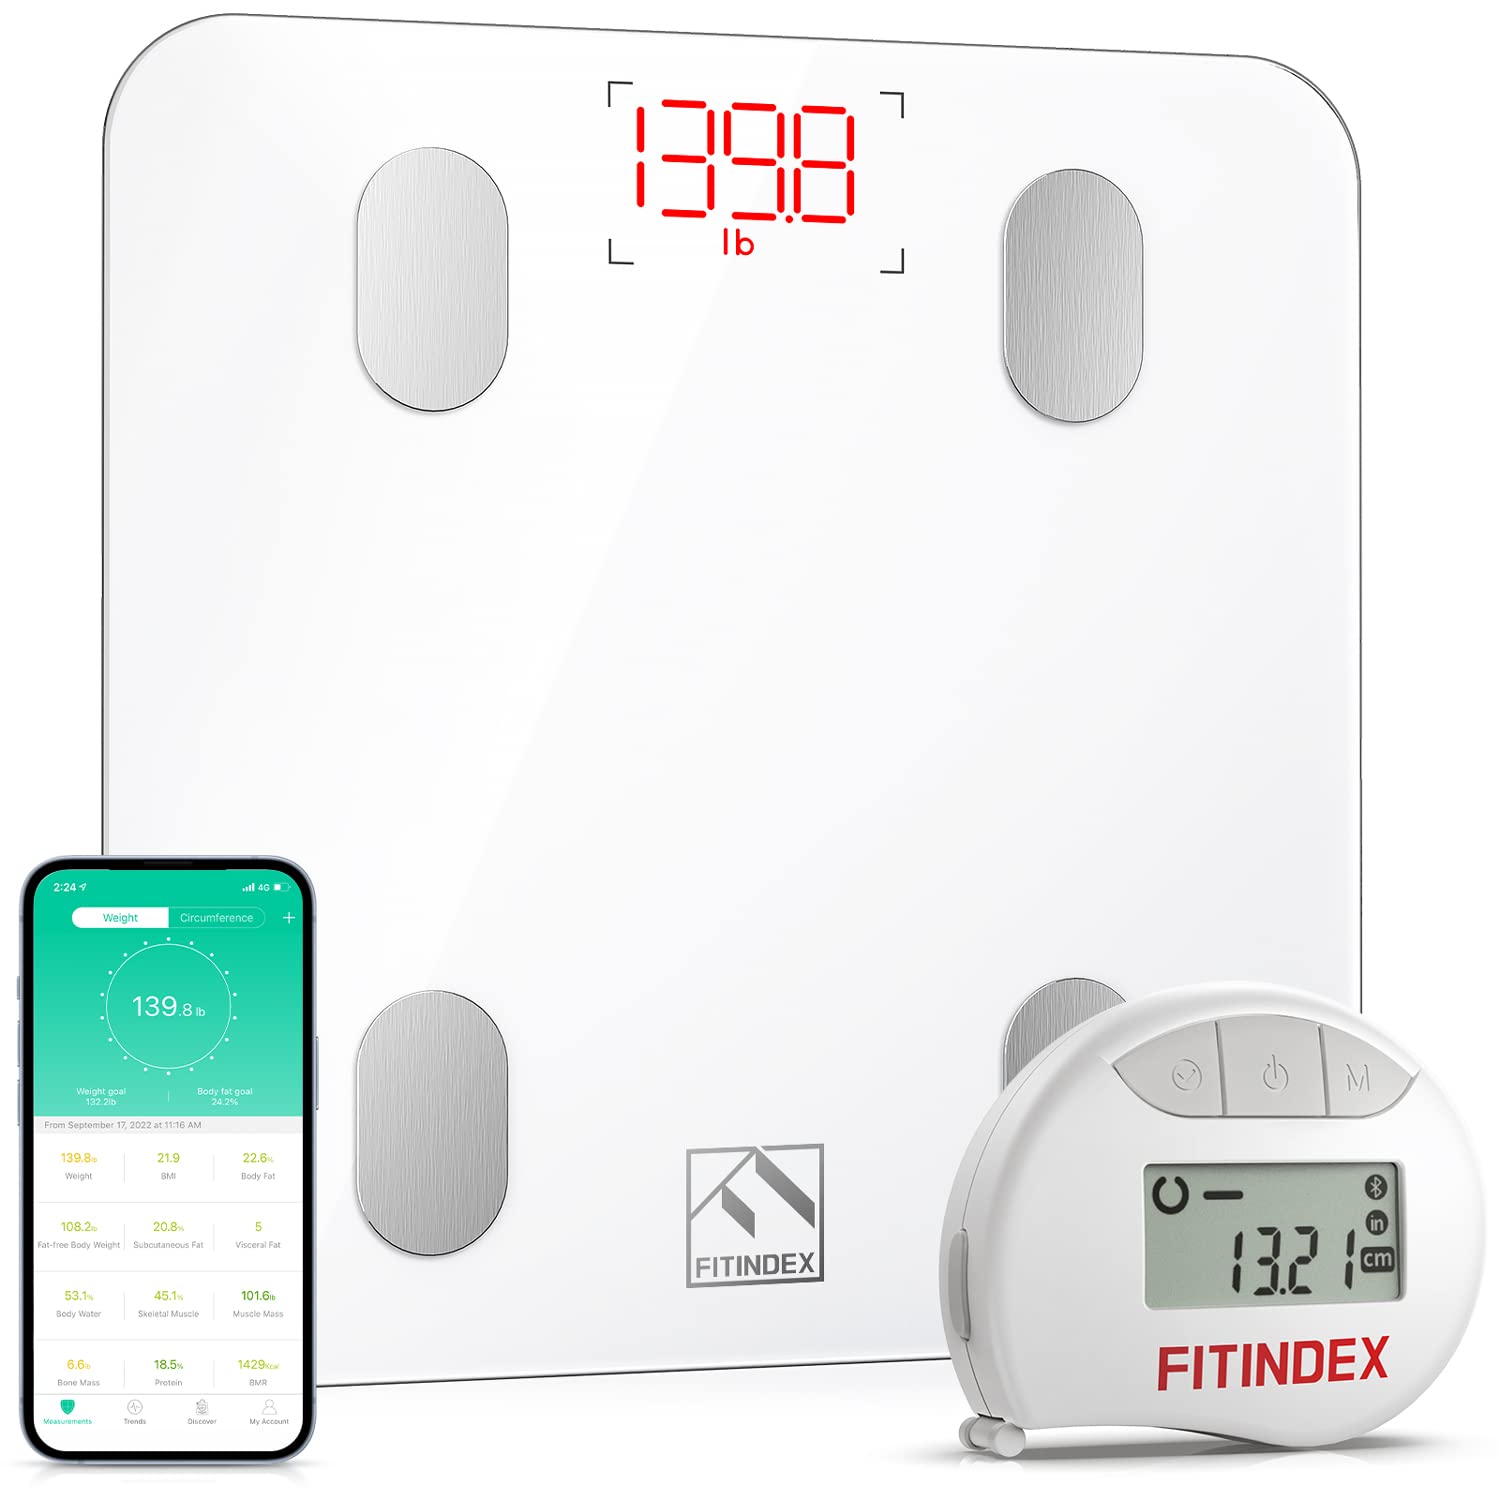 Should You Buy? FITINDEX Smart Body Fat Scale 